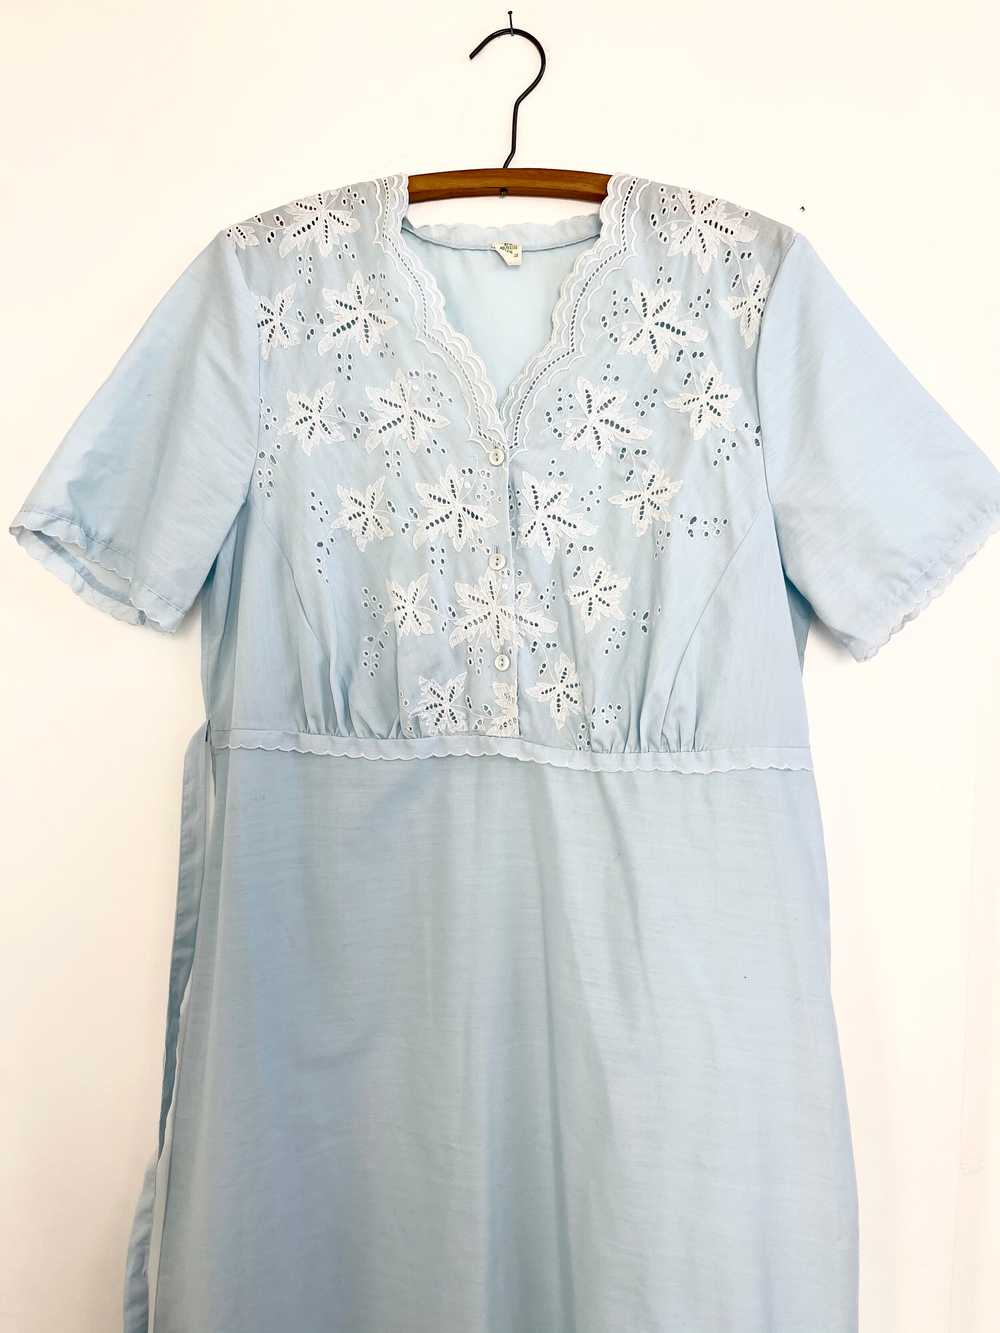 Pale Blue 40's Inspired Dress - image 4